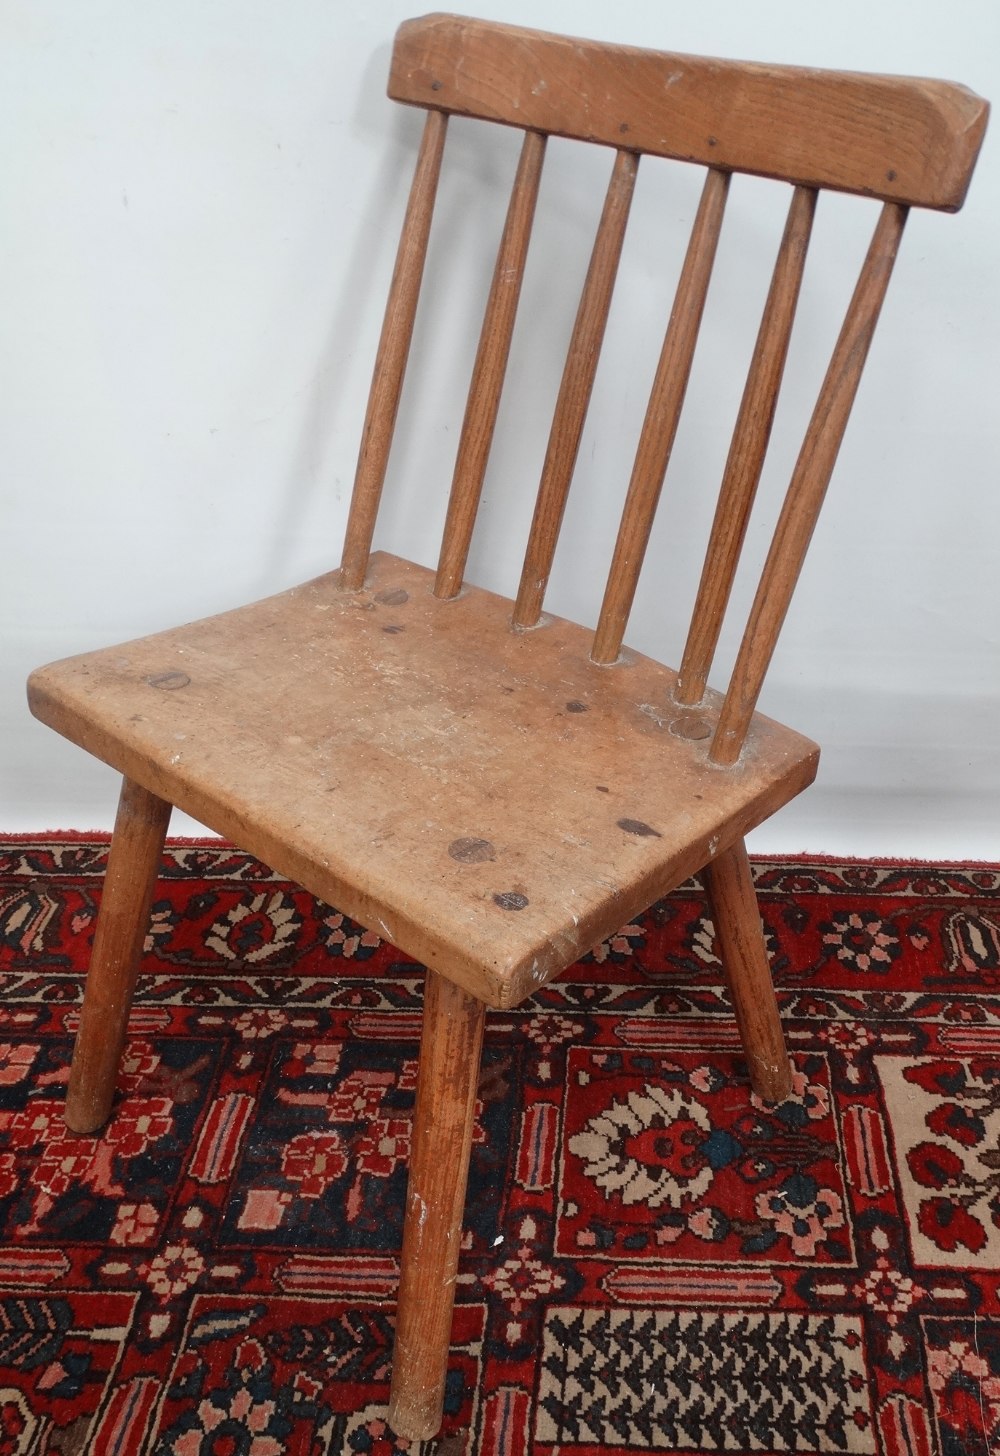 A late 18th or early 19th century stickback chair in sycamore and ash, possibly West Country.